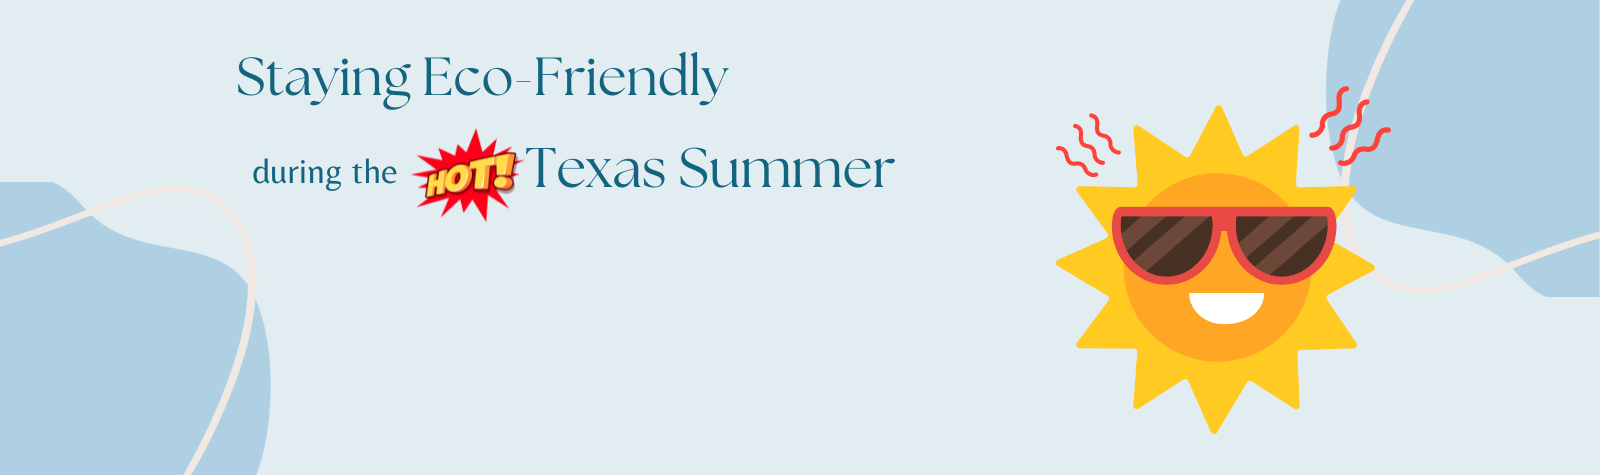 Staying Eco-friendly During the HOT Texas Summer